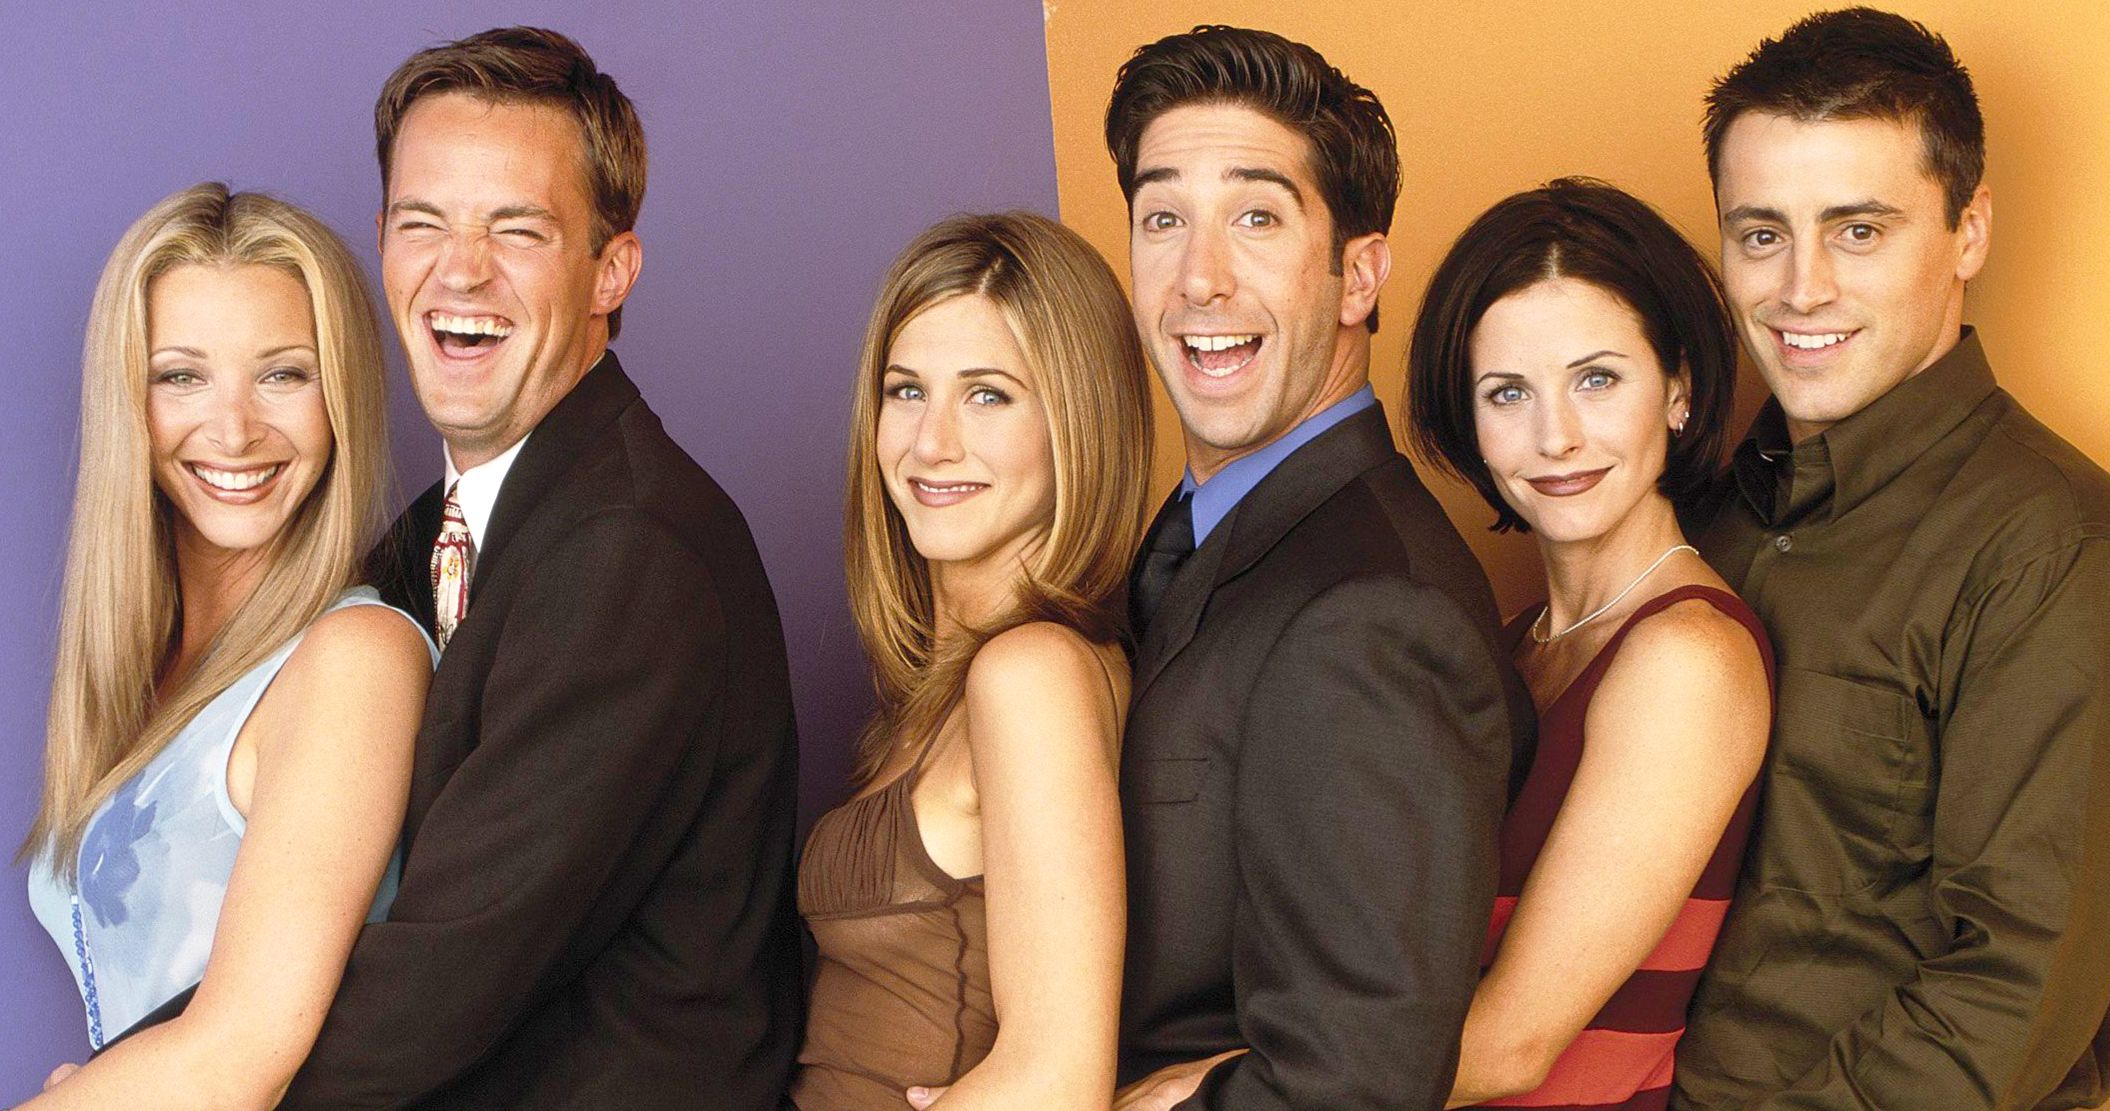 Friends Reunion Special Still Planning to Shoot This Summer